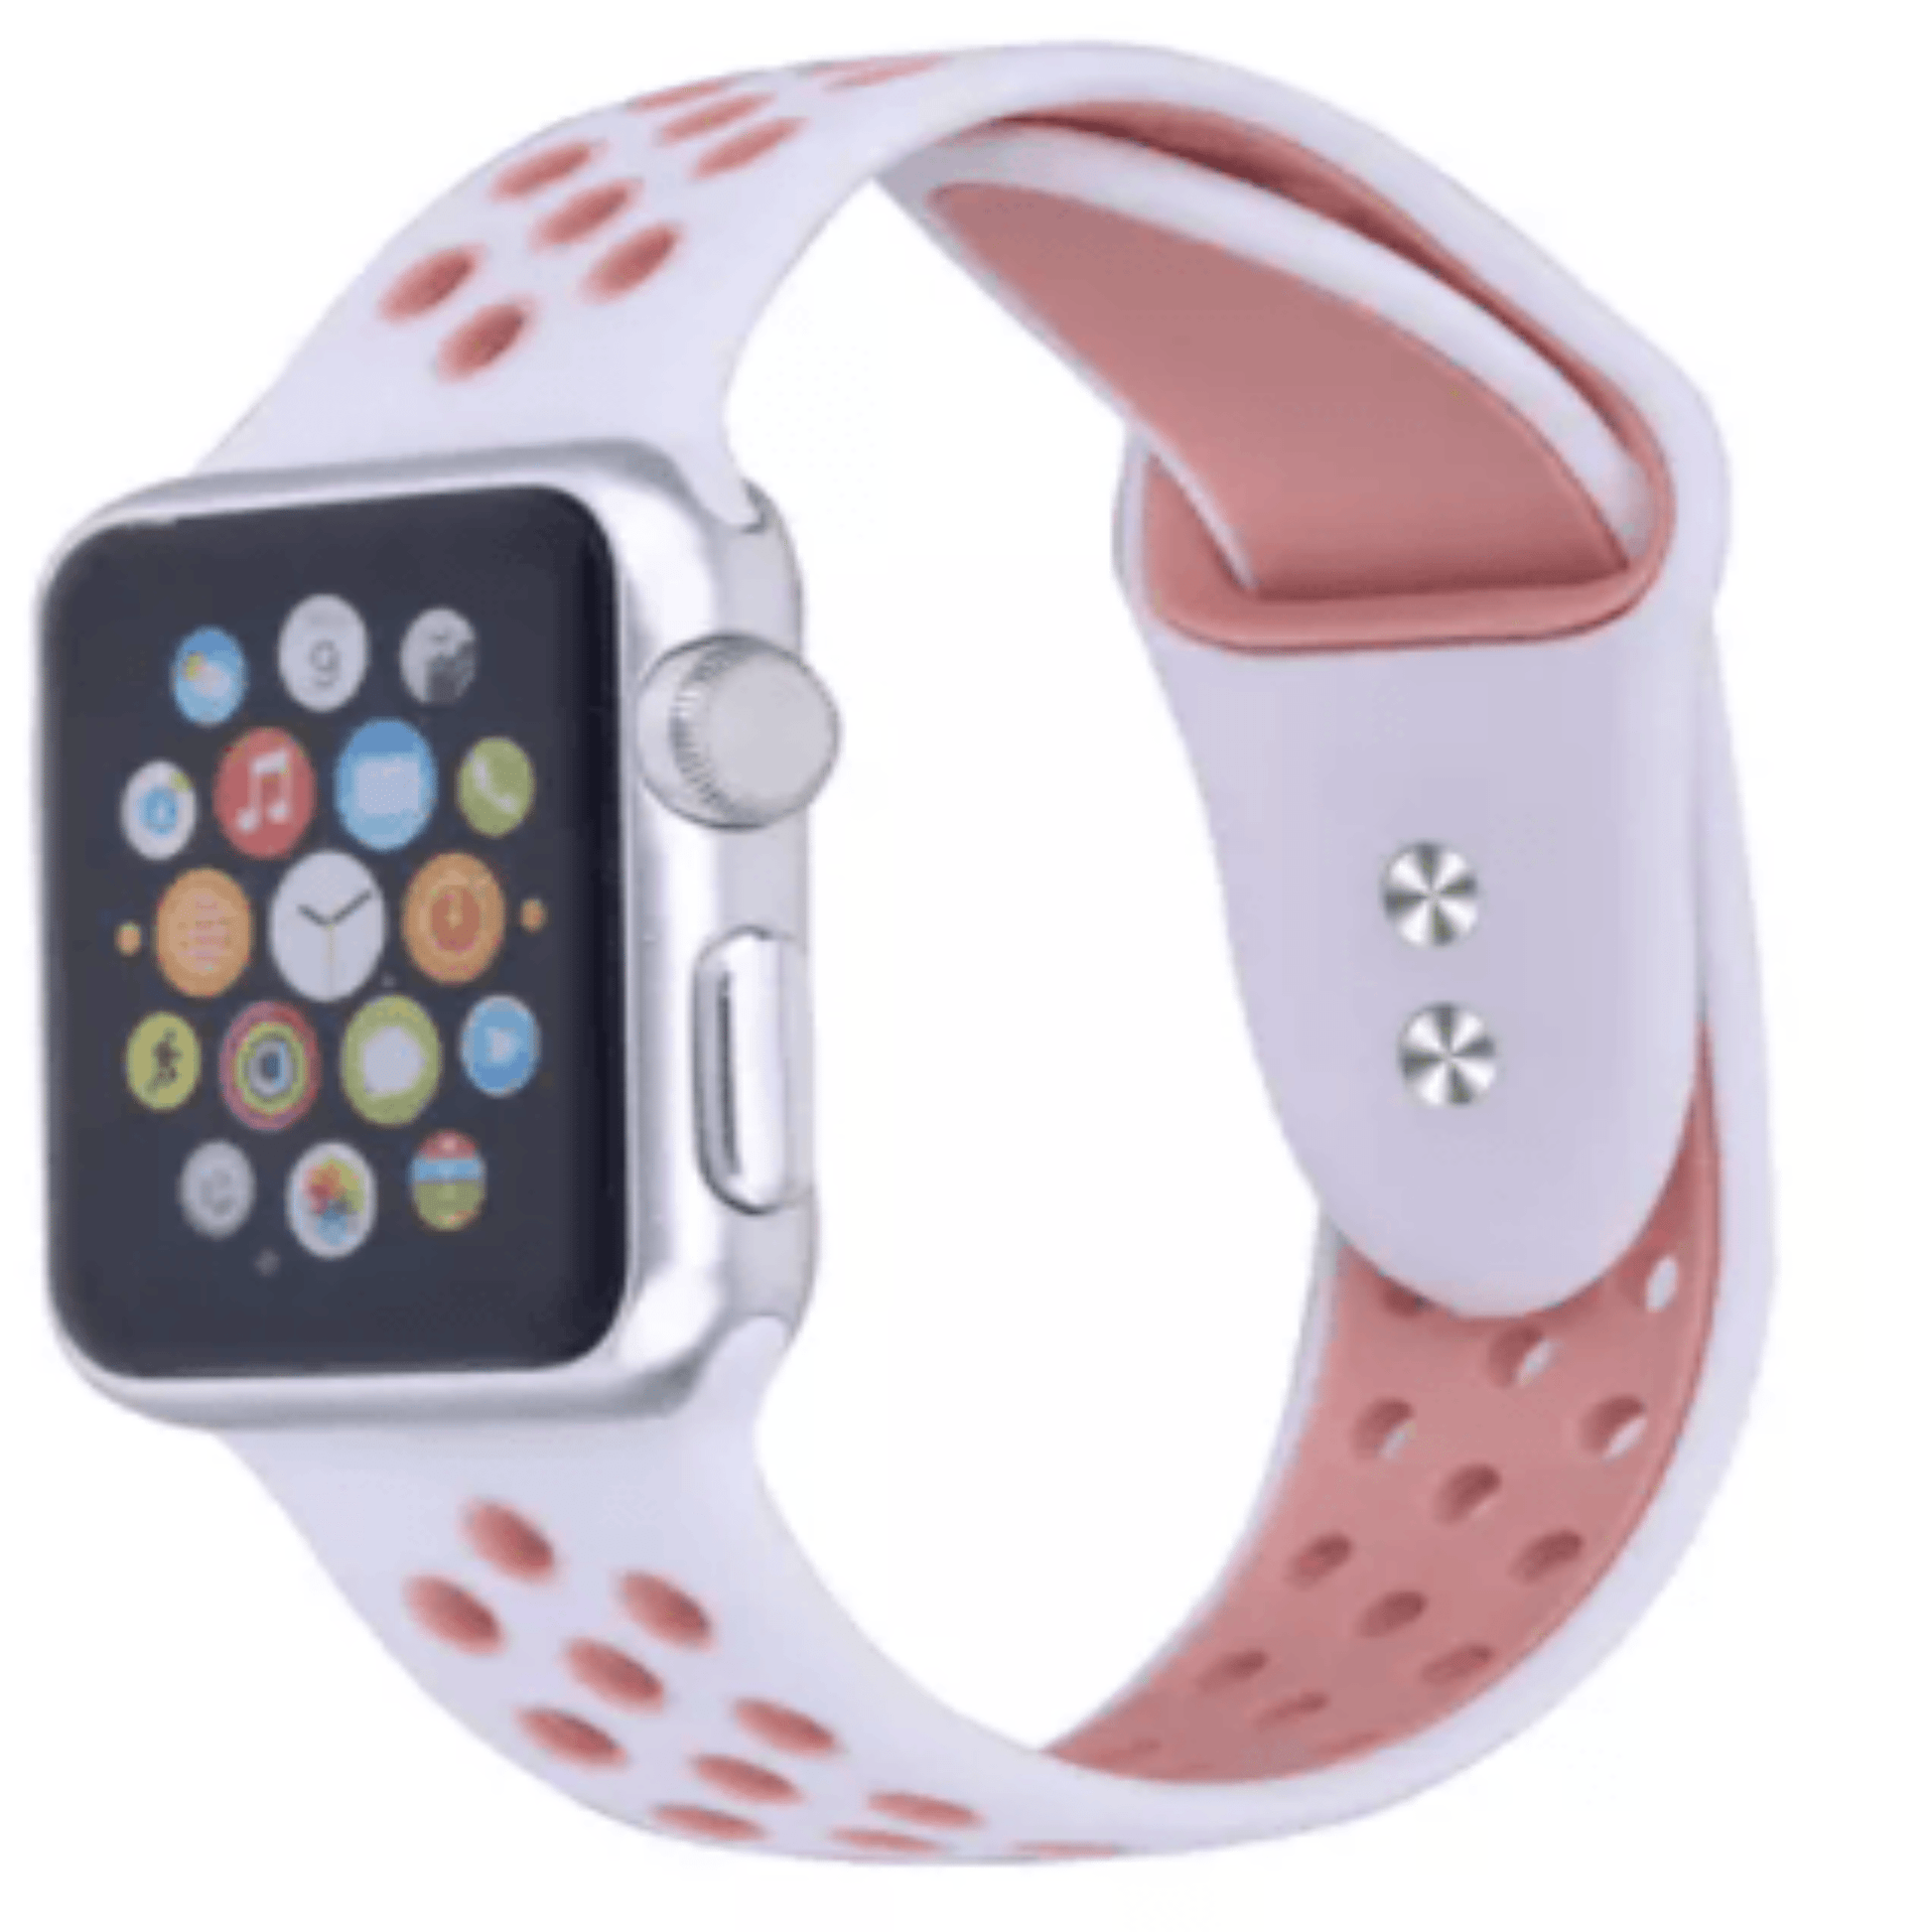 Breathable Silicone Sport Replacement Band for Apple Watch White Pink Apple Watch Band Elements Watches